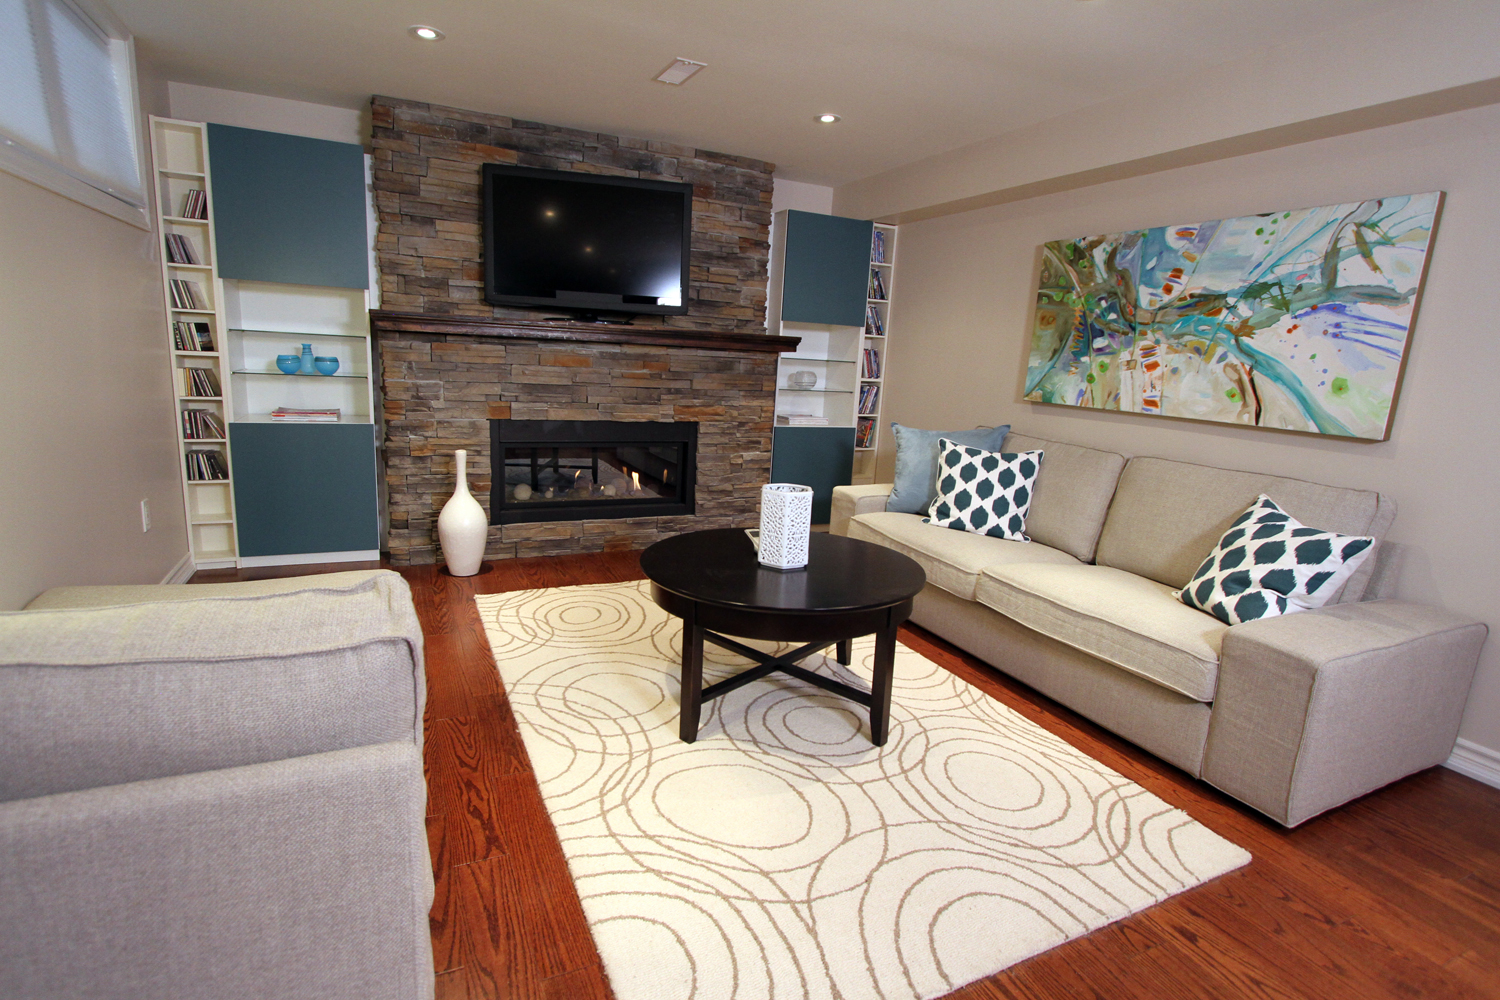 Living room basement with a fireplace and television